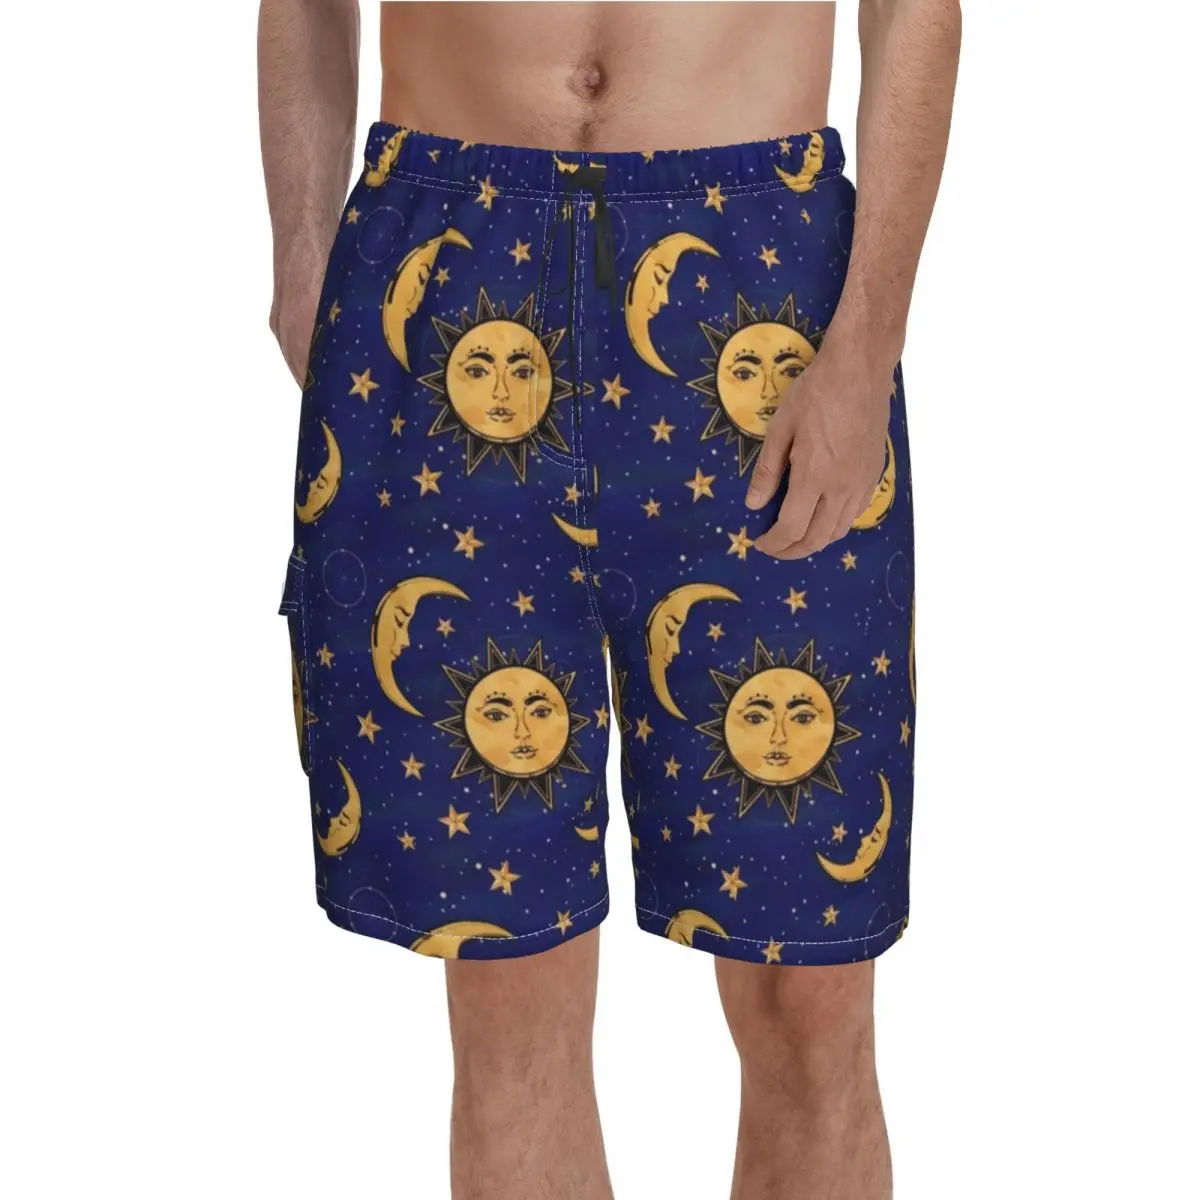 

Vintage Sun Board Shorts Moon And Stars Celestial Males Funny Board Short Pants High Quality Custom Plus Size Swimming Trunks